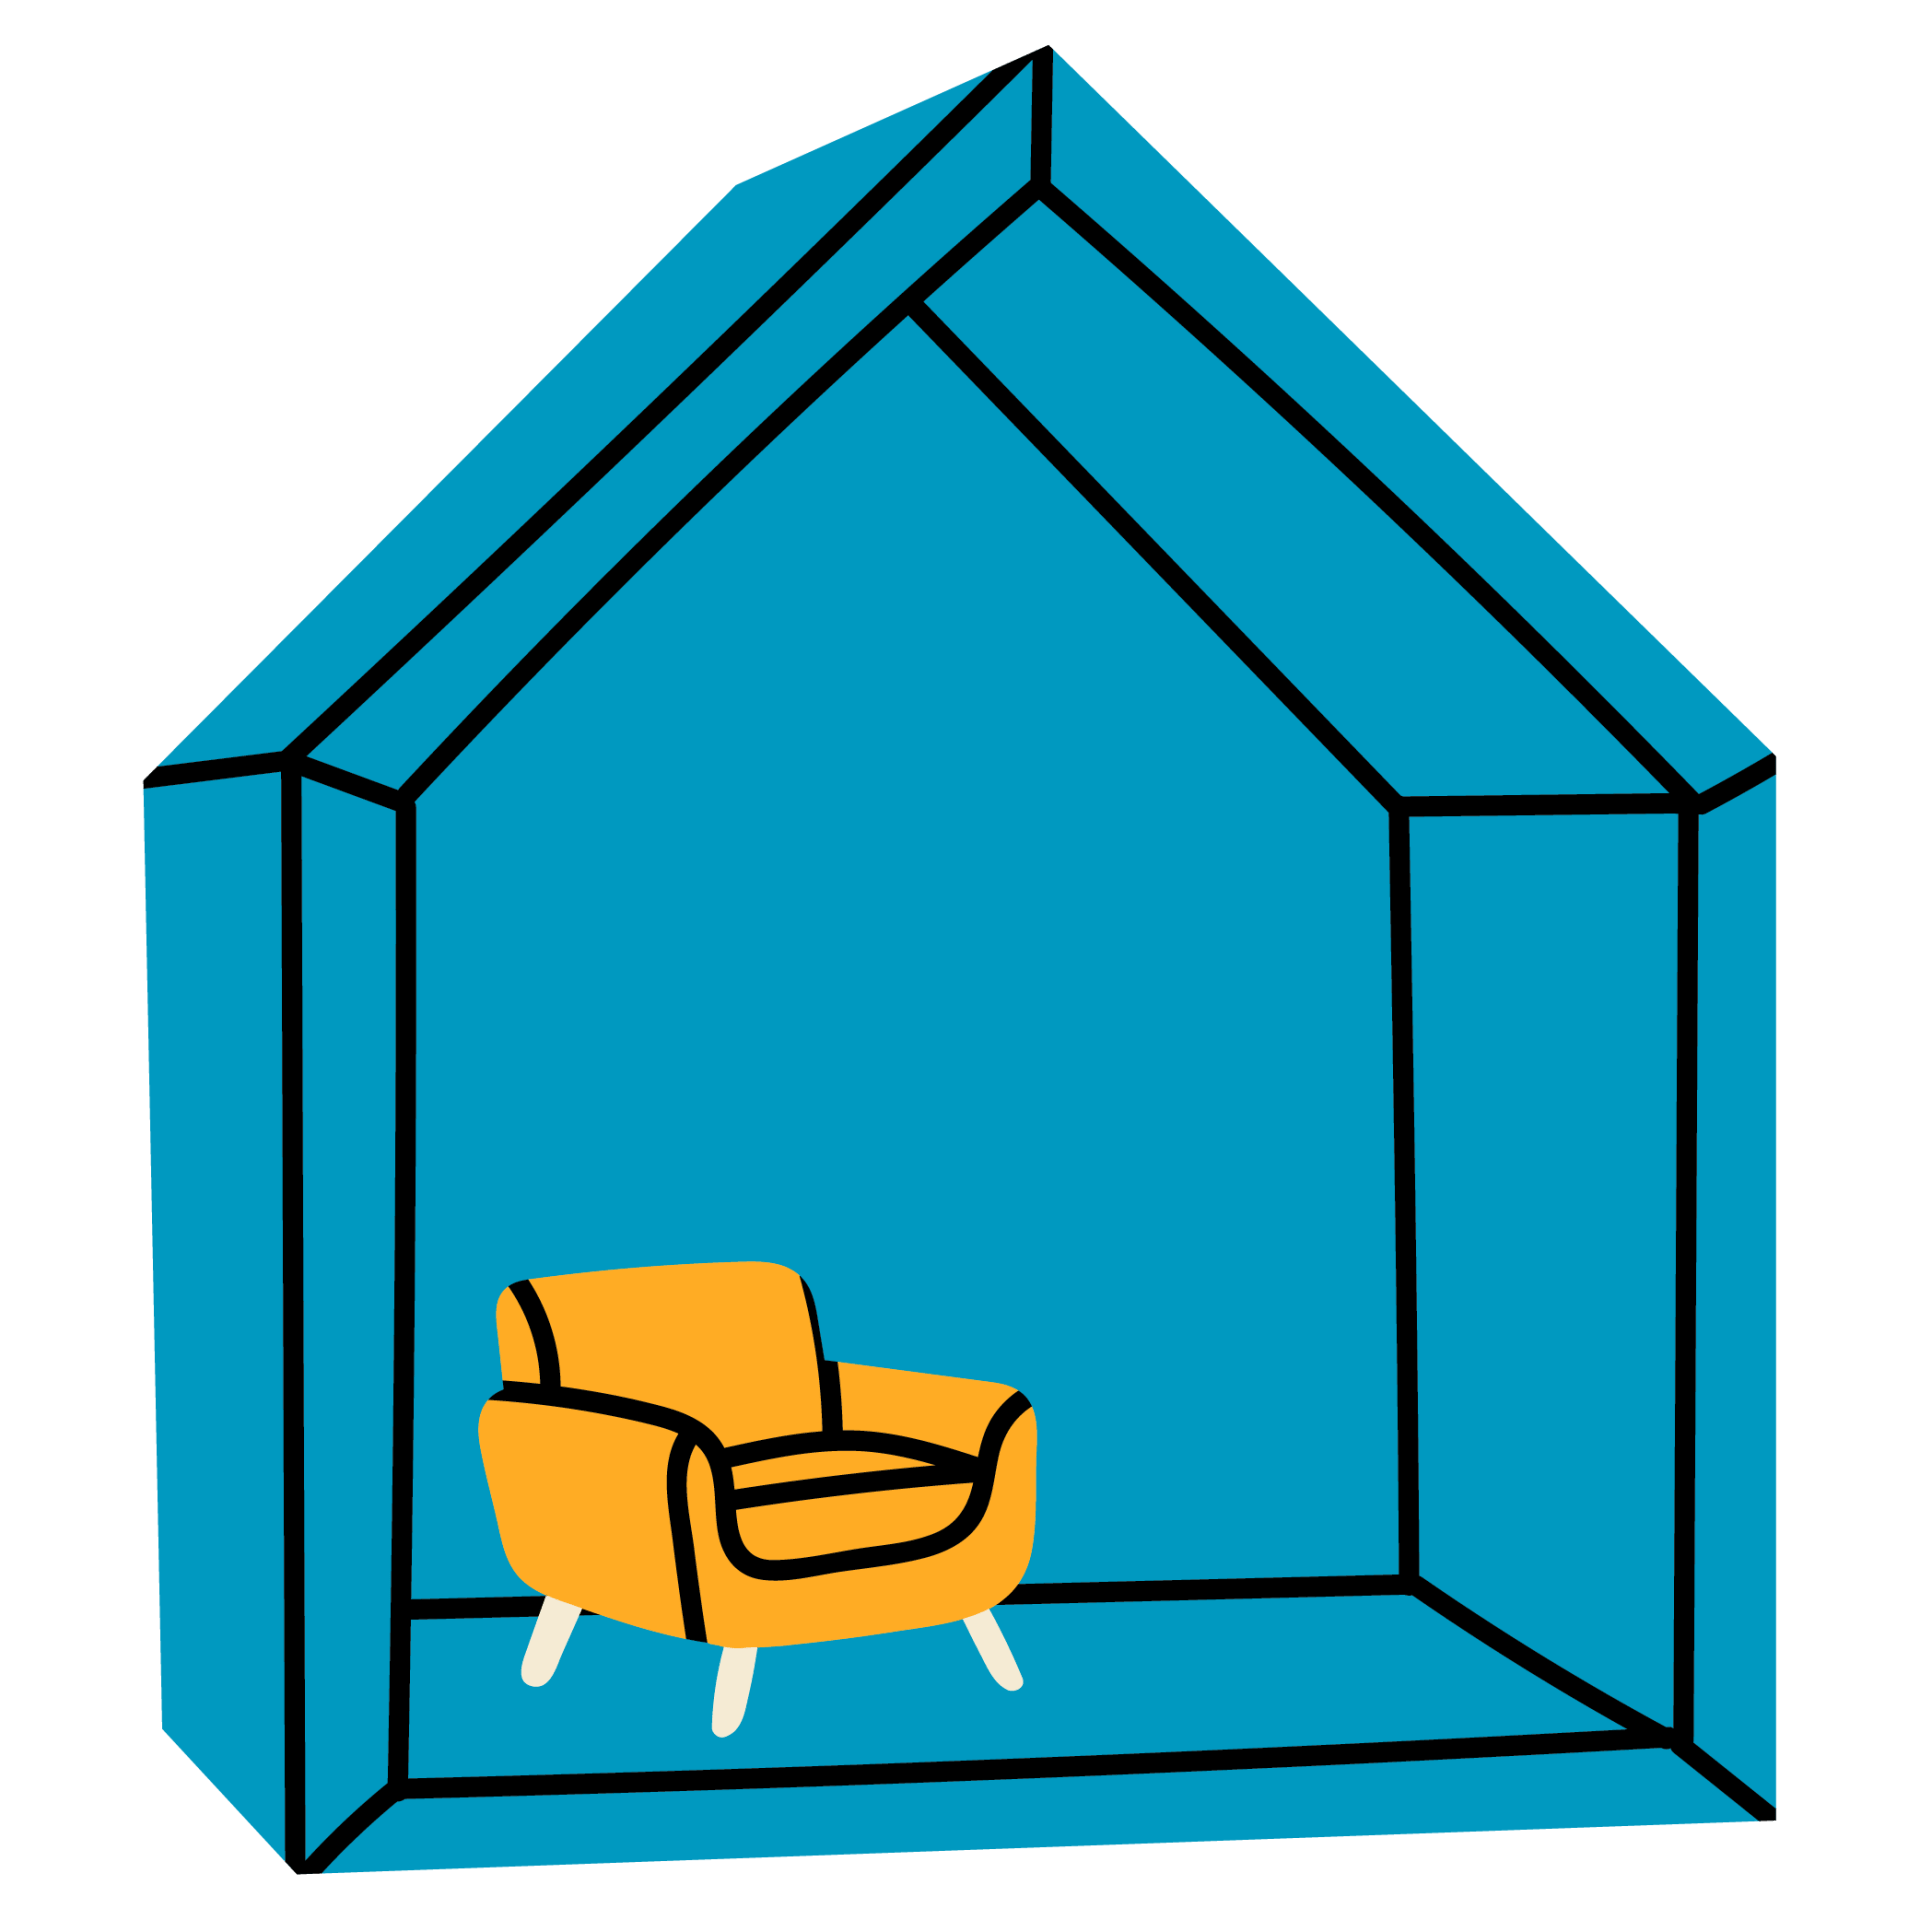 Toy House with Yellow Sofa. Childhood, children games, preschool activities concept. Hand drawn Vector.